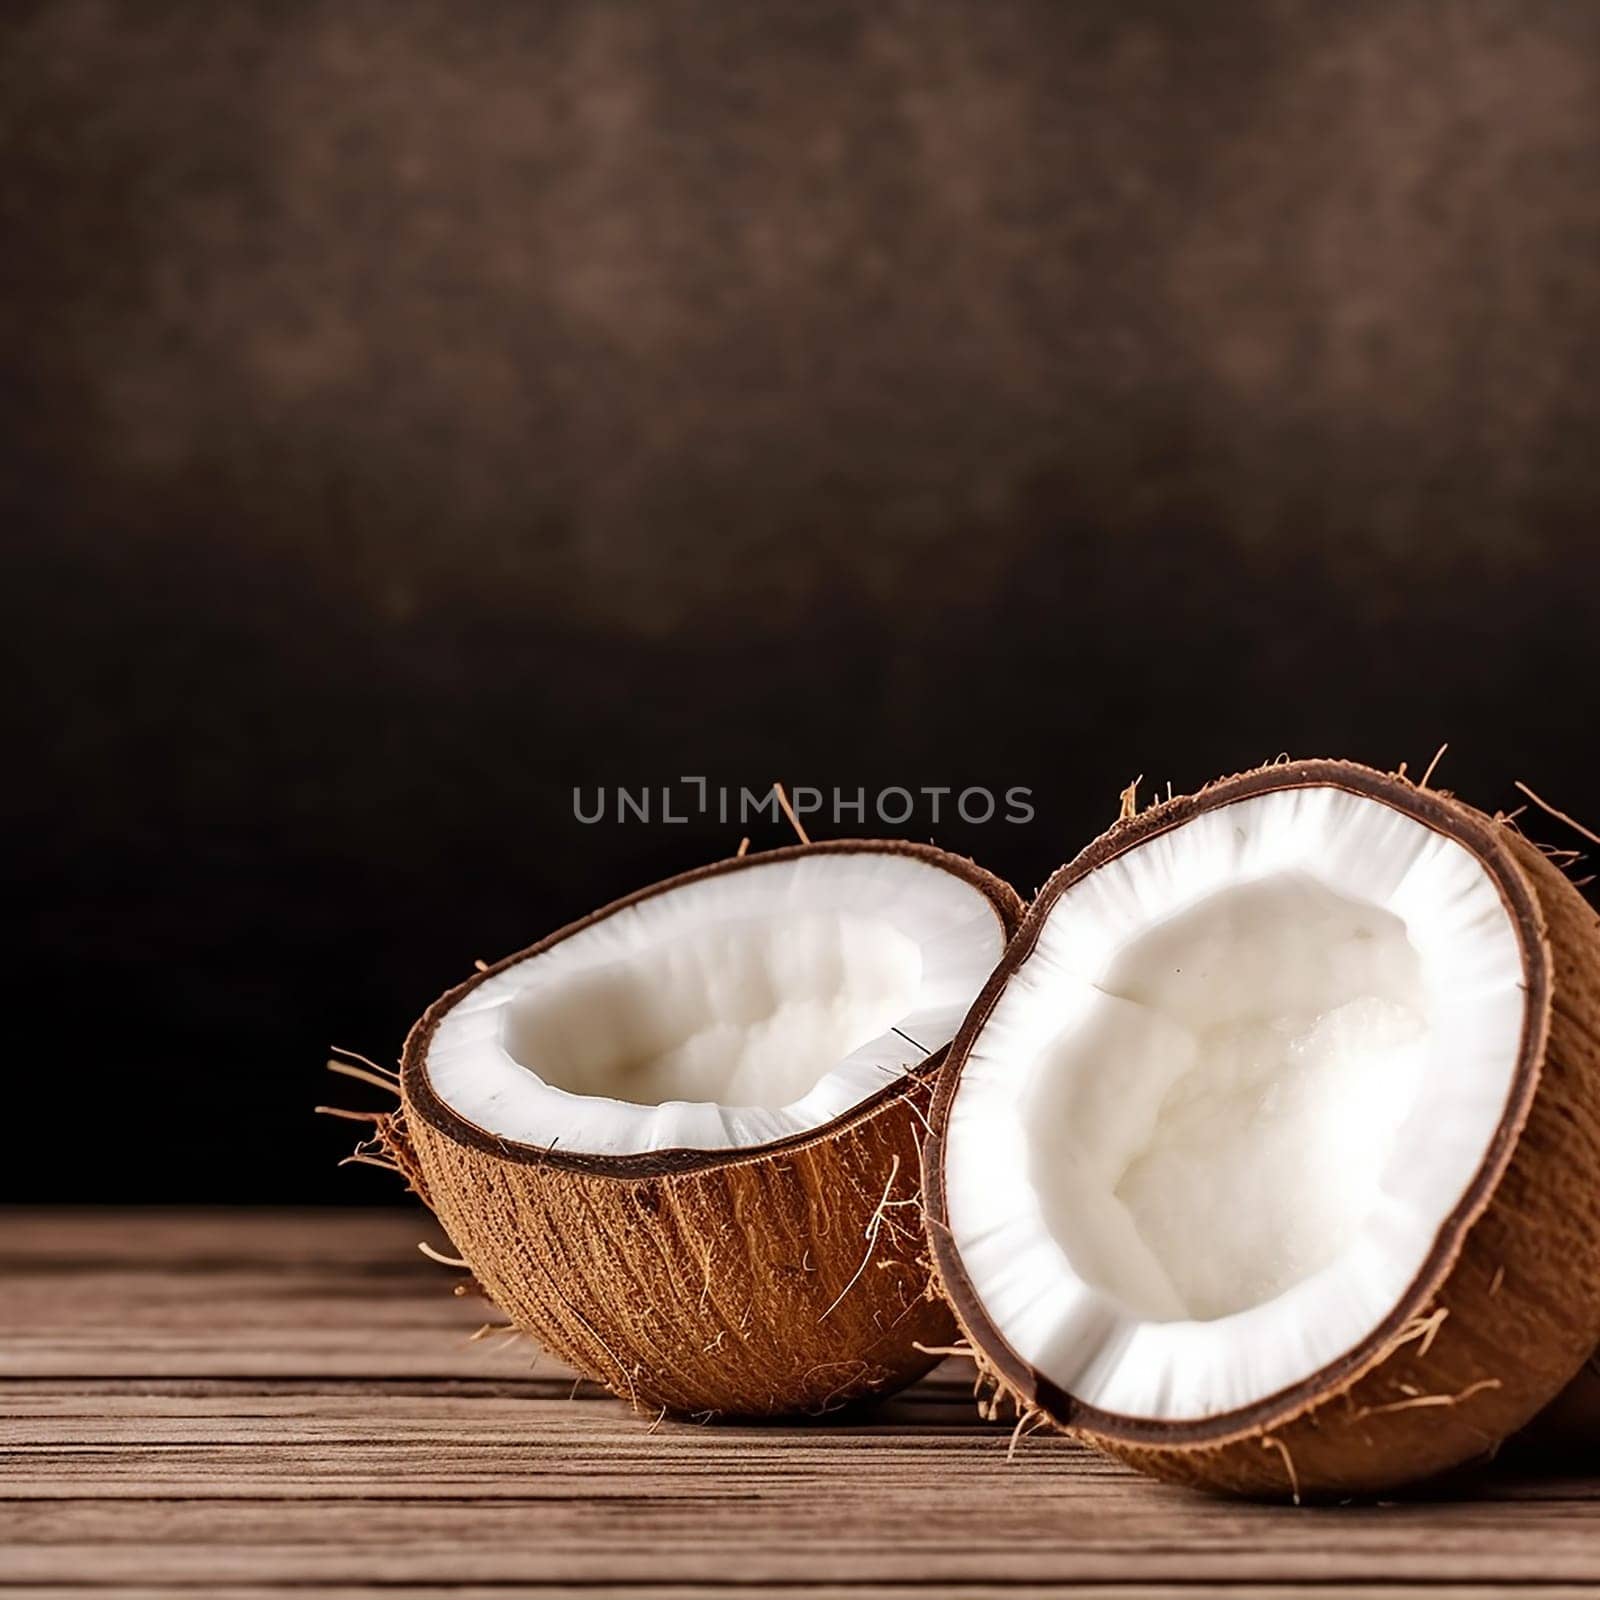 Two halved coconuts on a wooden surface with dark background